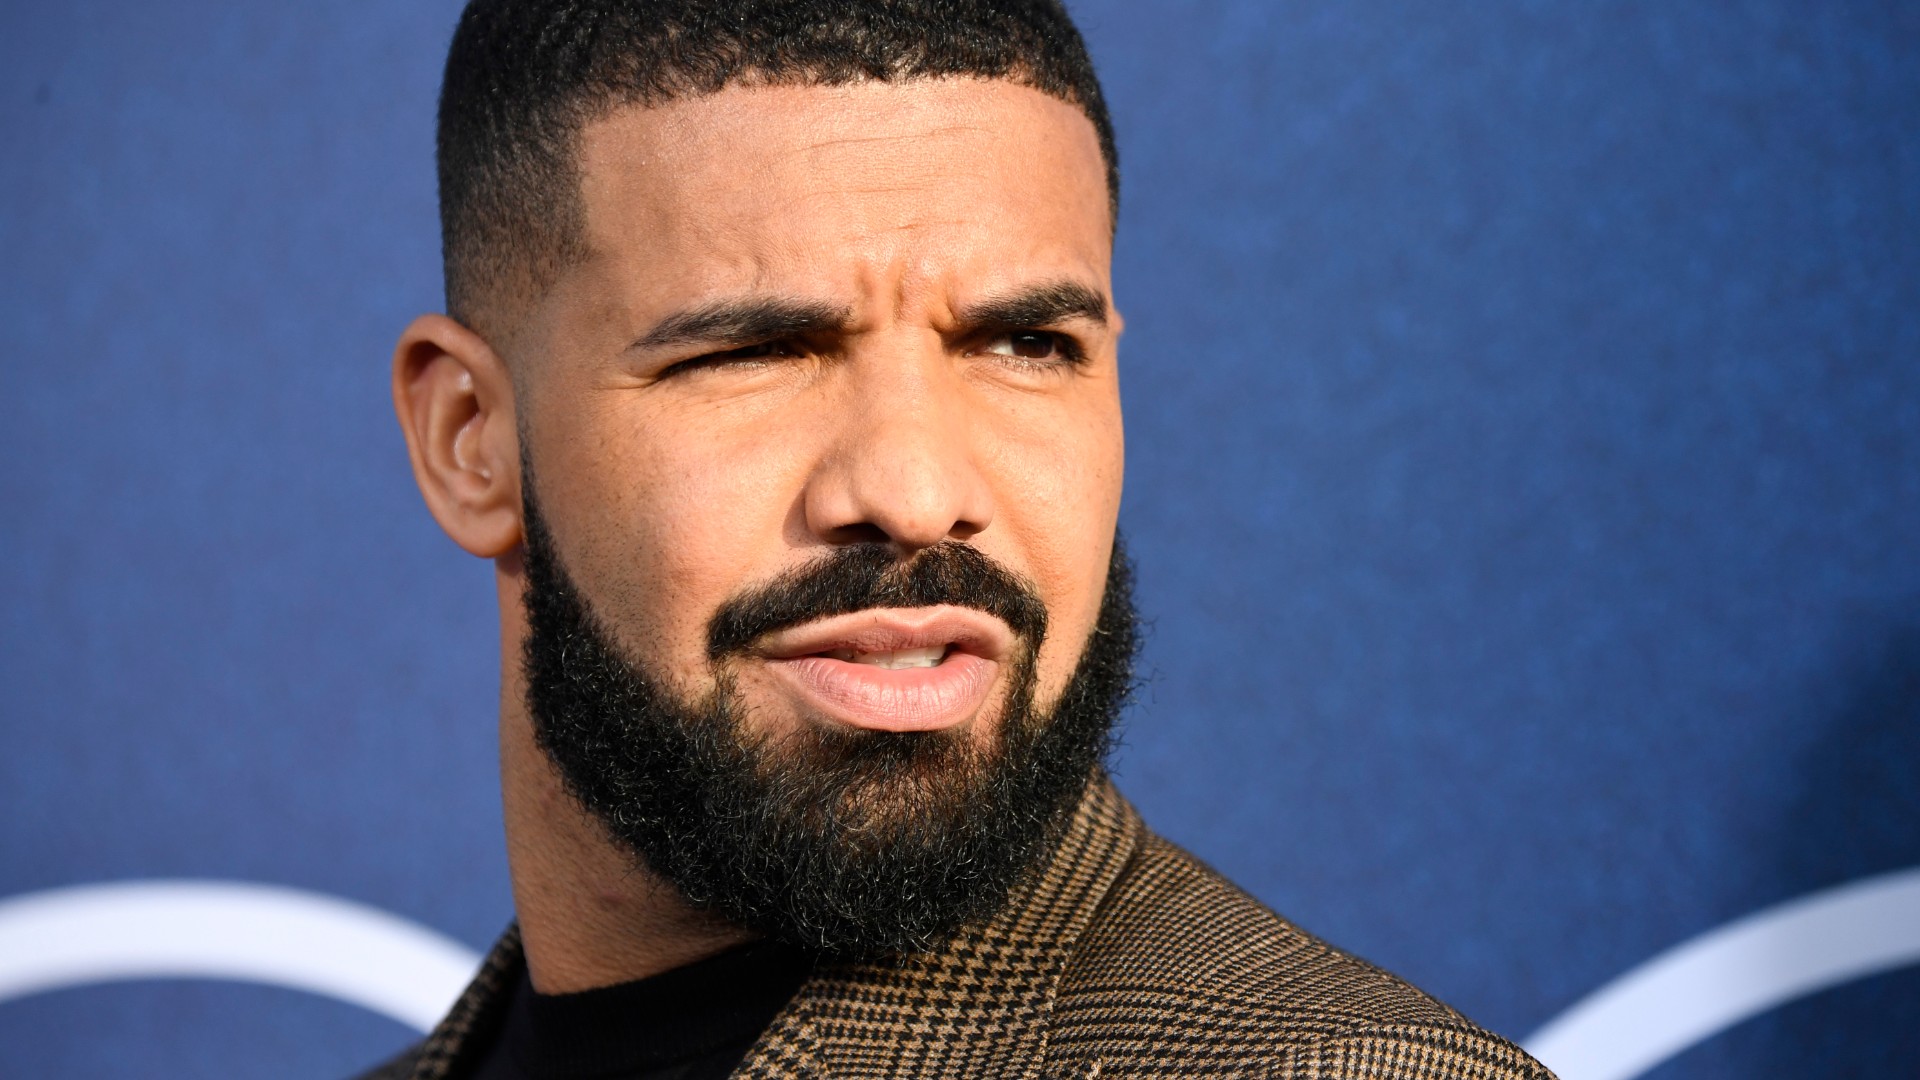 Drake faces backlash for dissing Moroccan women